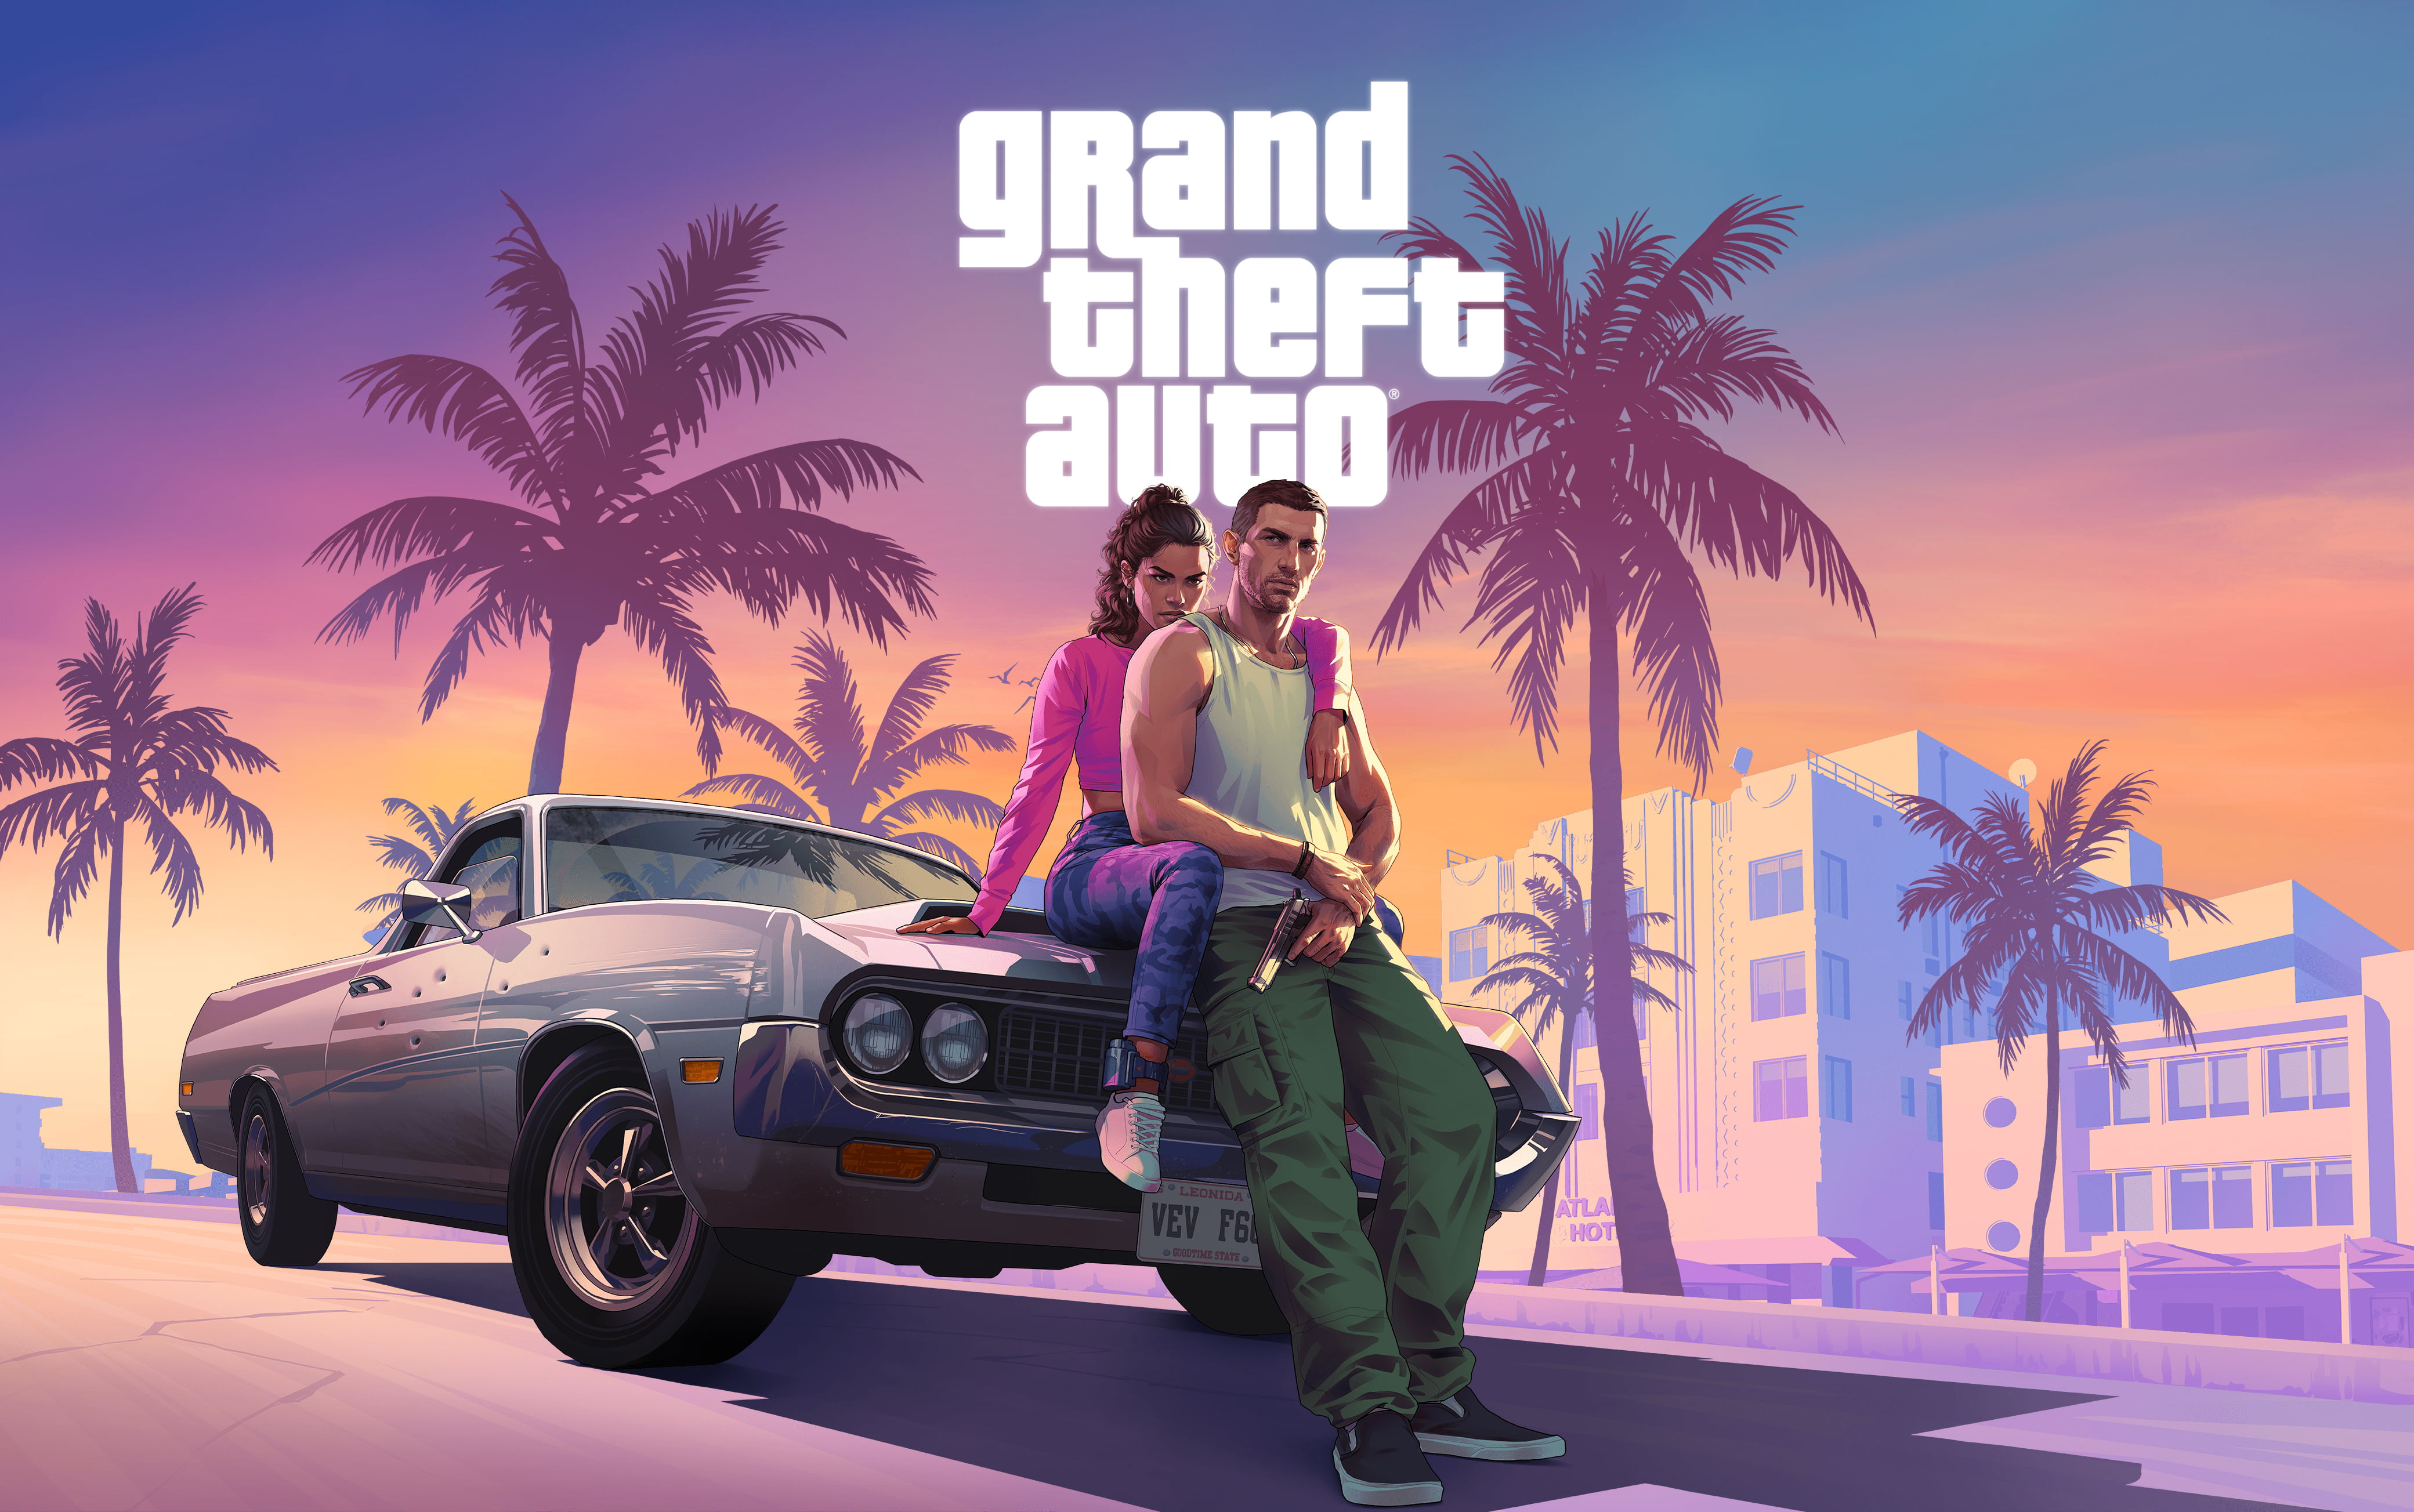 Grand Theft Auto VI: The Pinnacle of Gaming Anticipation